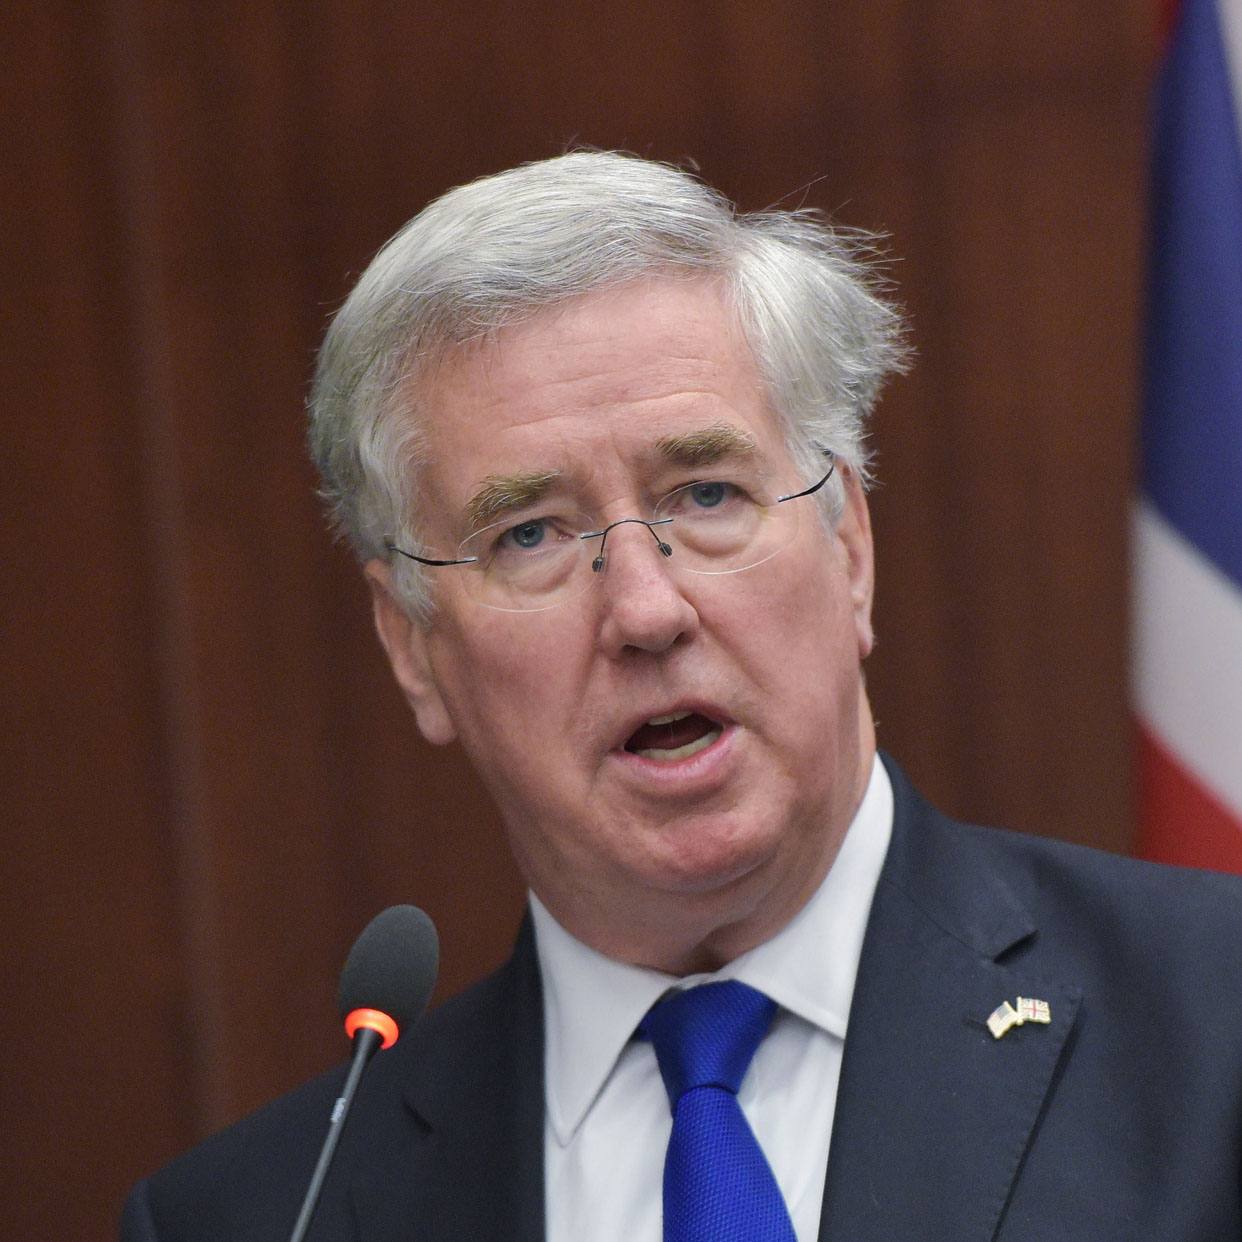 Britain&#039;s Defense Secretary Michael Fallon speaks during a discussion at the Center for Strategic and International Studies (CSIS) on March 11, 2015 in Washington, DC. AFP PHOTO/MANDEL NGAN(P